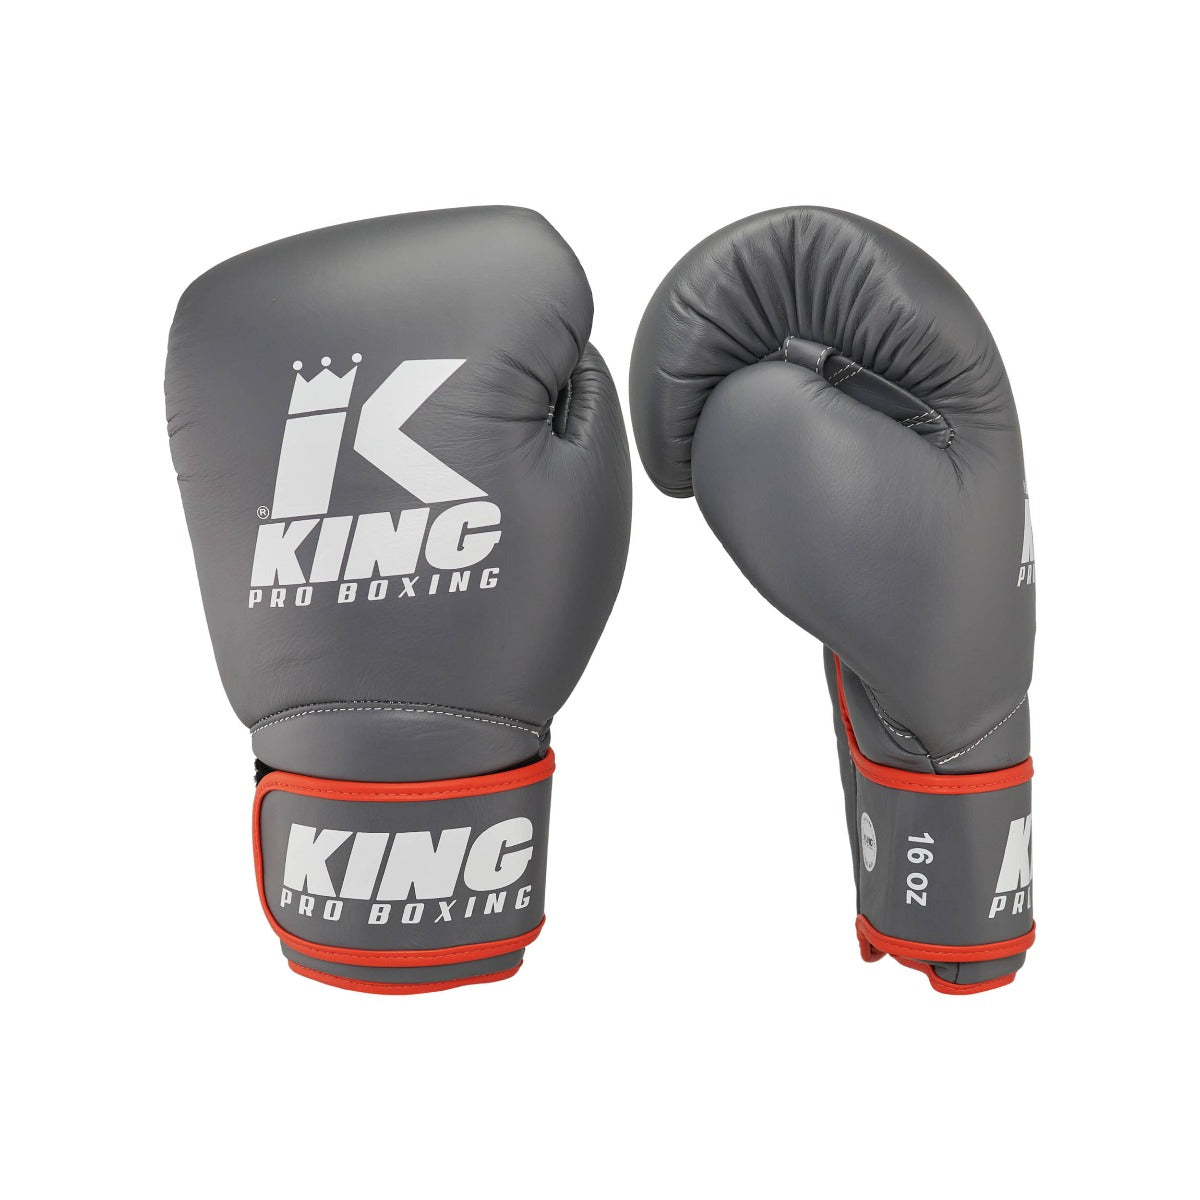 King PRO boxing boxing gloves - STAR 14